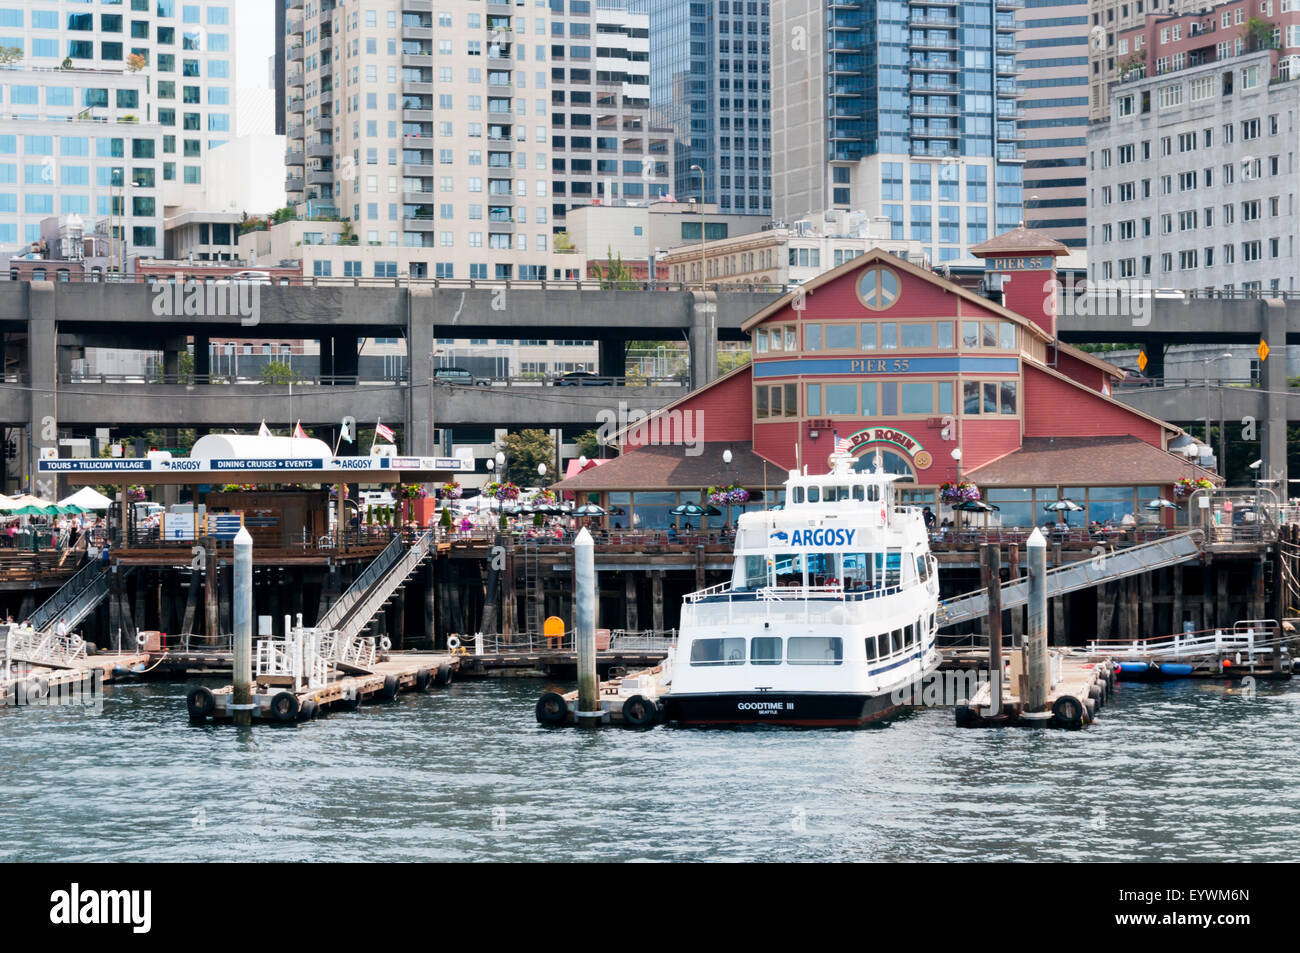 Goodtime III of Argosy Cruises moored at Pier 55 in Seattle, with the double-deck Alaskan Way Viaduct in the background. Stock Photo